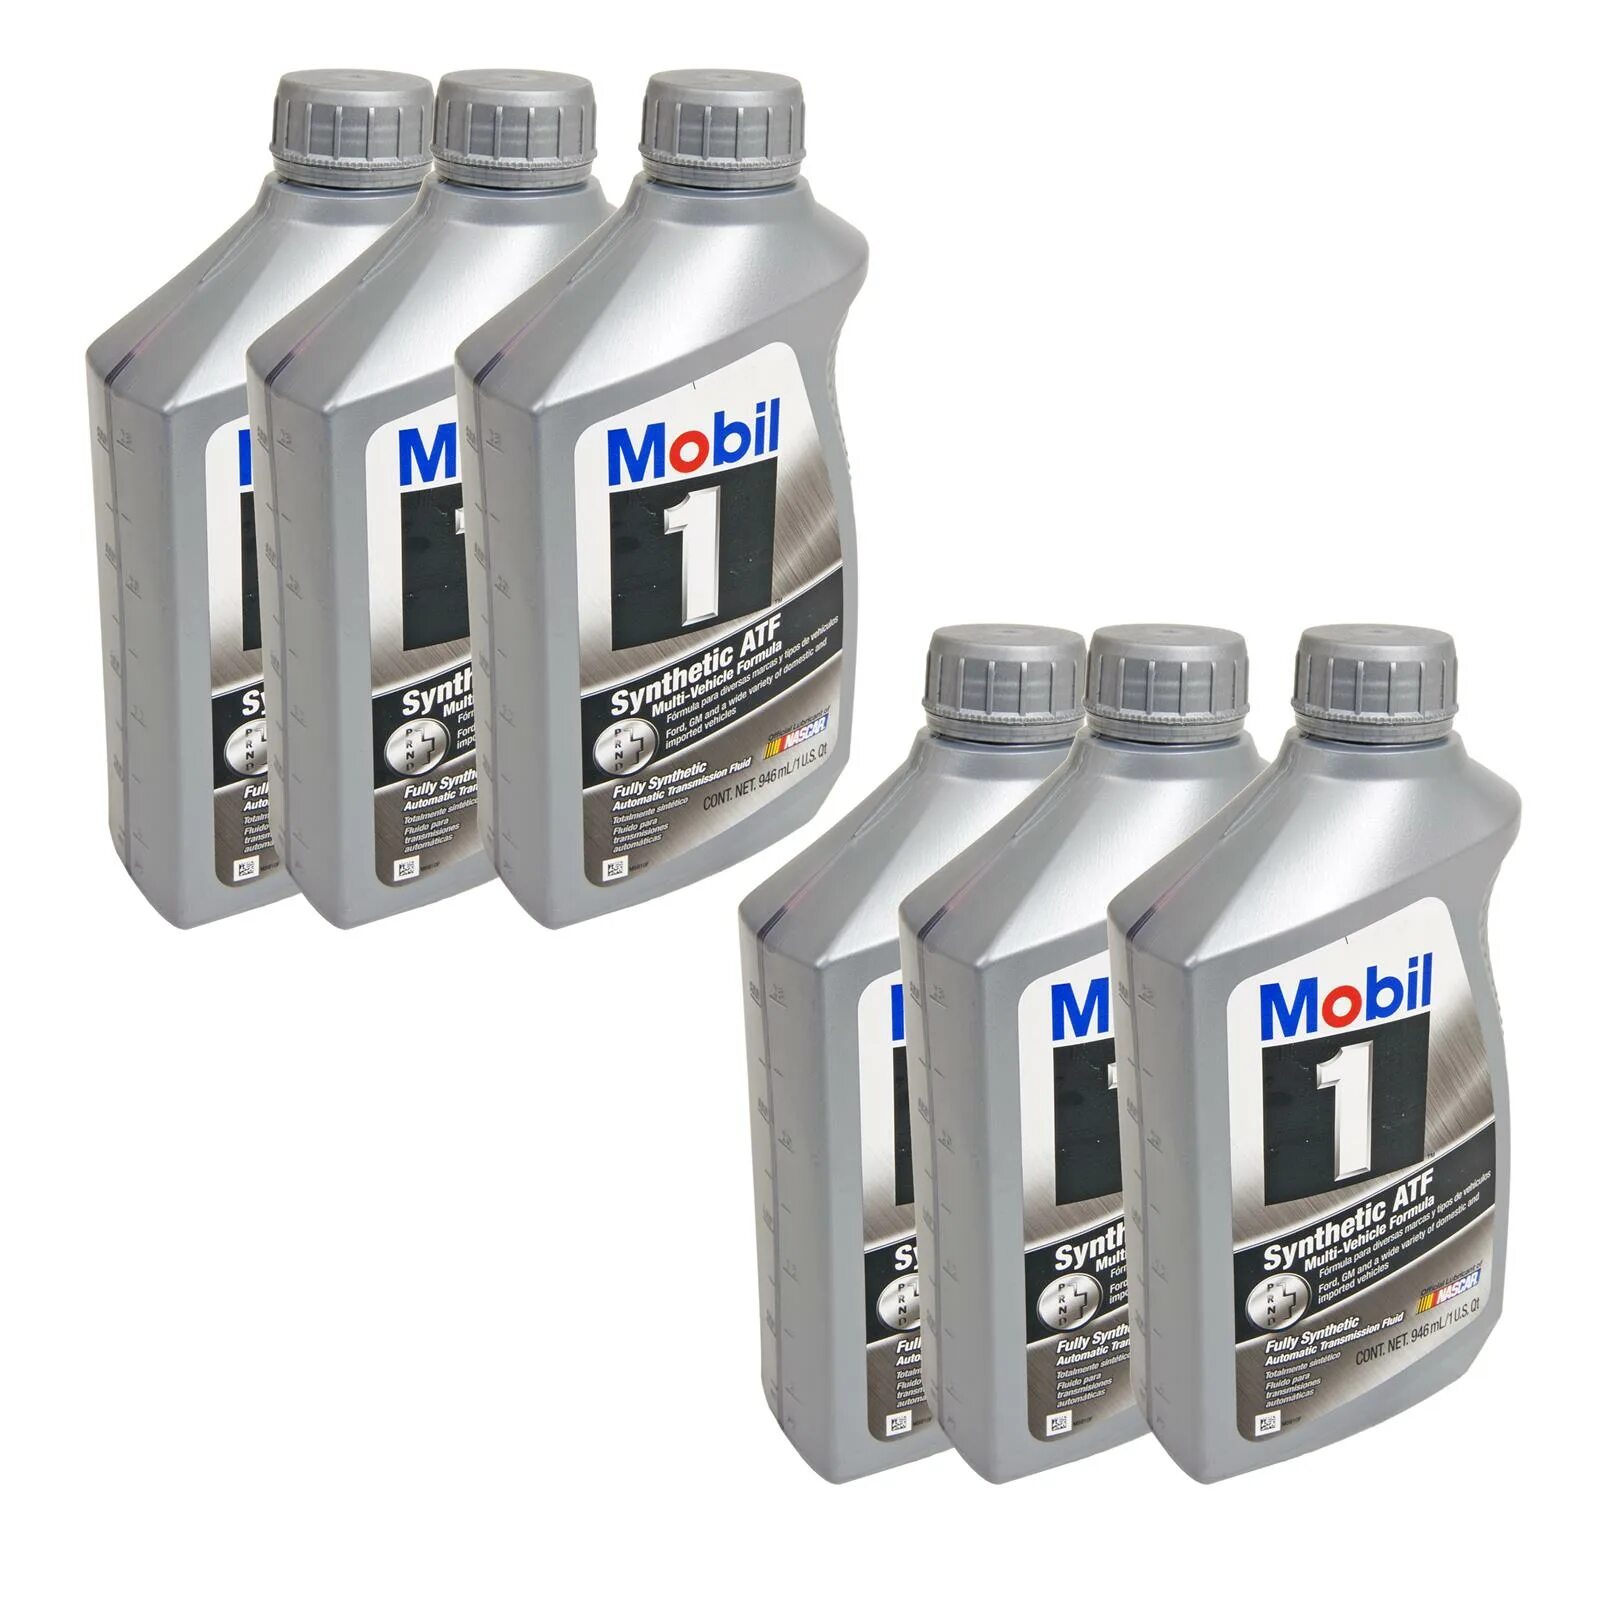 Mobil 1 Synthetic АТФ. Mobil 1 Synthetic ATF 0.946Л. Mobil 1 SAIC-GM. Mobil1 1992 года.